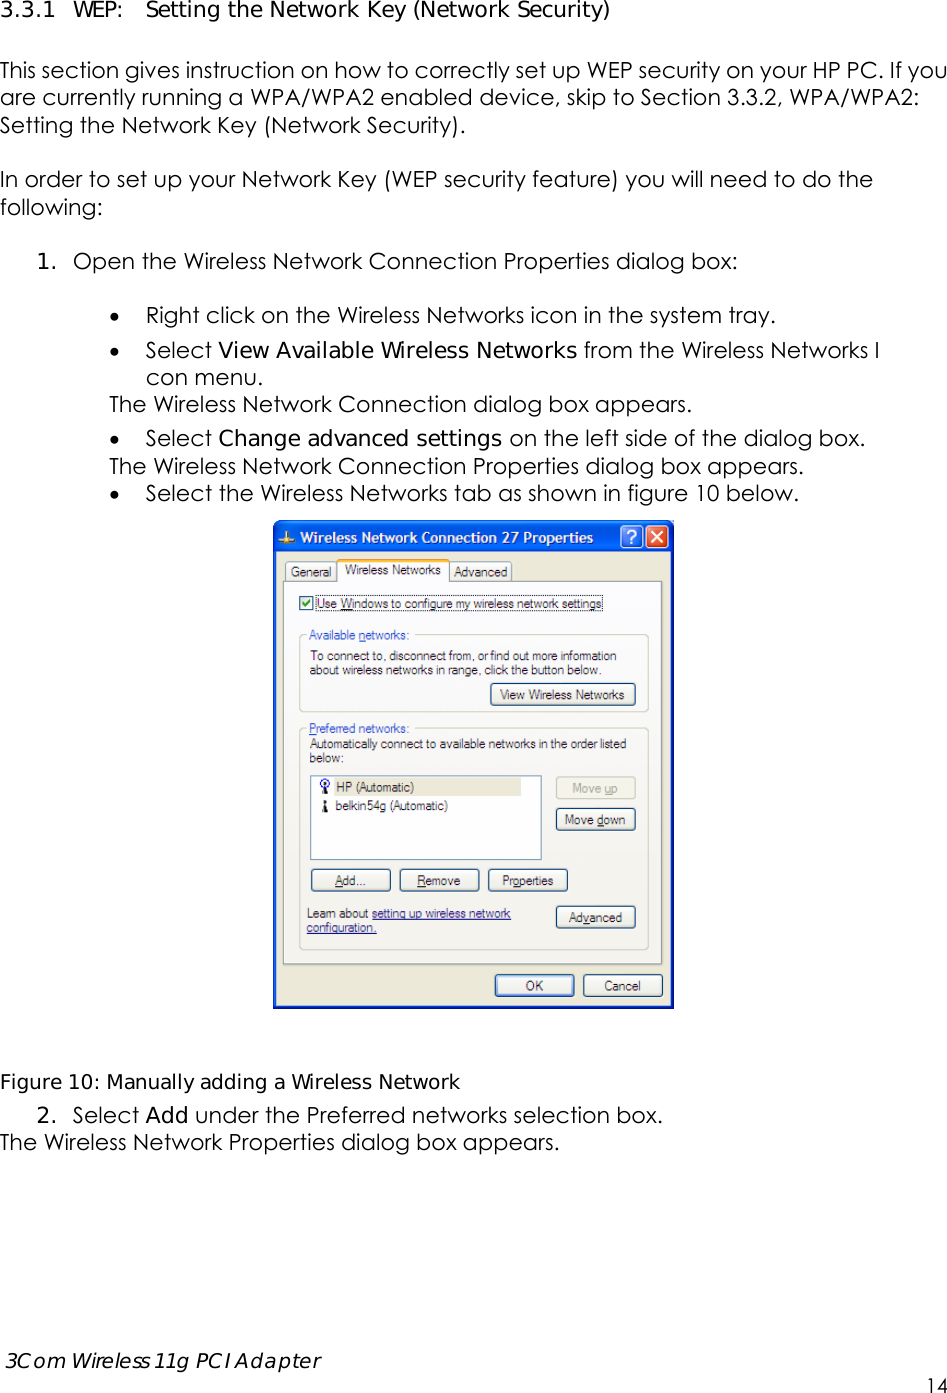      3Com Wireless 11g PCI Adapter     14 3.3.1 WEP:  Setting the Network Key (Network Security)  This section gives instruction on how to correctly set up WEP security on your HP PC. If you are currently running a WPA/WPA2 enabled device, skip to Section 3.3.2, WPA/WPA2: Setting the Network Key (Network Security).    In order to set up your Network Key (WEP security feature) you will need to do the following:  1. Open the Wireless Network Connection Properties dialog box:   Right click on the Wireless Networks icon in the system tray.  Select View Available Wireless Networks from the Wireless Networks I con menu. The Wireless Network Connection dialog box appears.  Select Change advanced settings on the left side of the dialog box. The Wireless Network Connection Properties dialog box appears.  Select the Wireless Networks tab as shown in figure 10 below.   Figure 10: Manually adding a Wireless Network  2. Select Add under the Preferred networks selection box.   The Wireless Network Properties dialog box appears.  